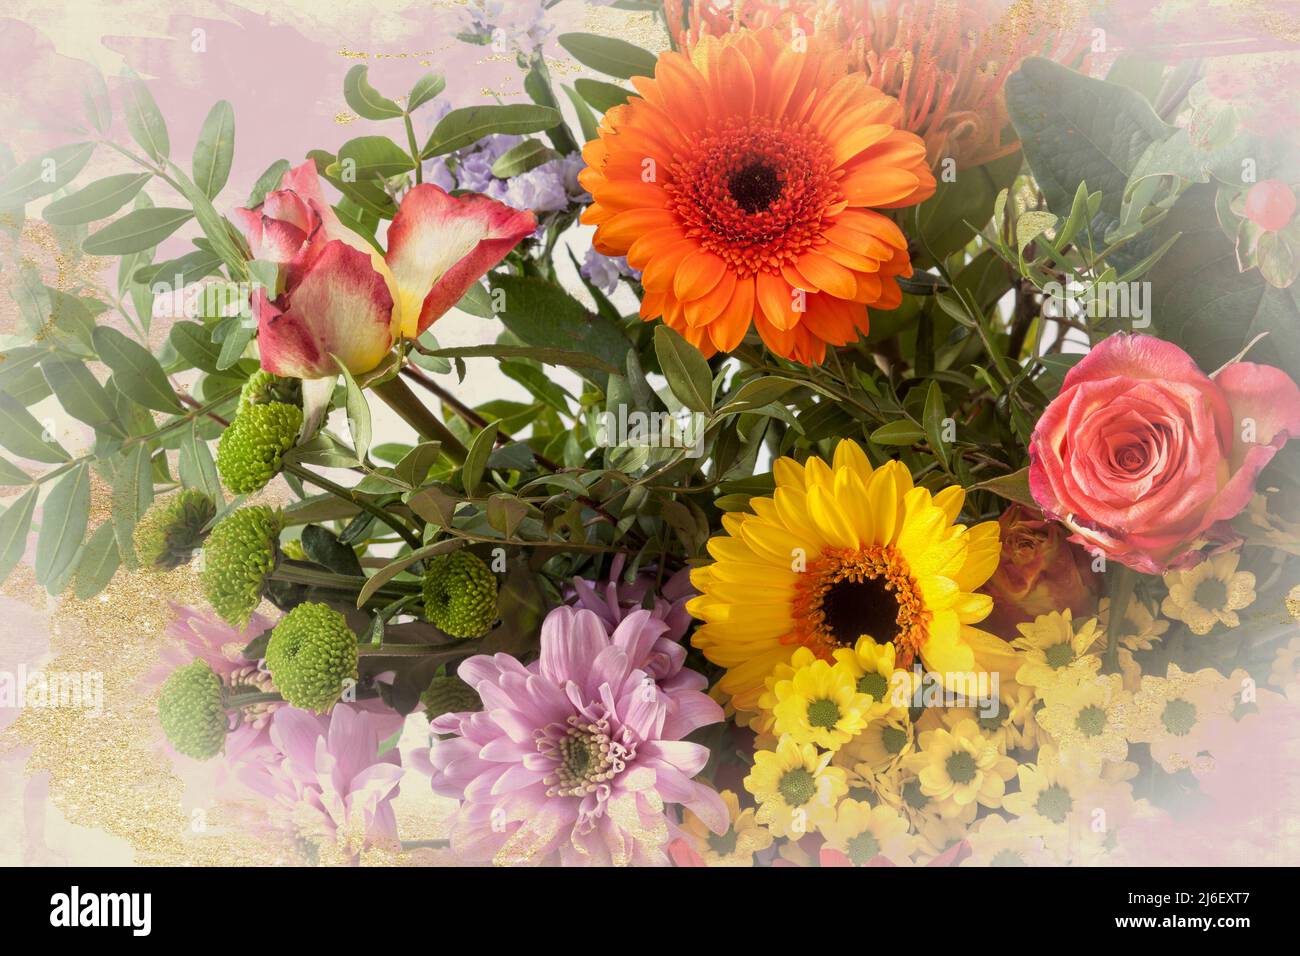 FLORAL CONCEPT: Greeting card design Stock Photo